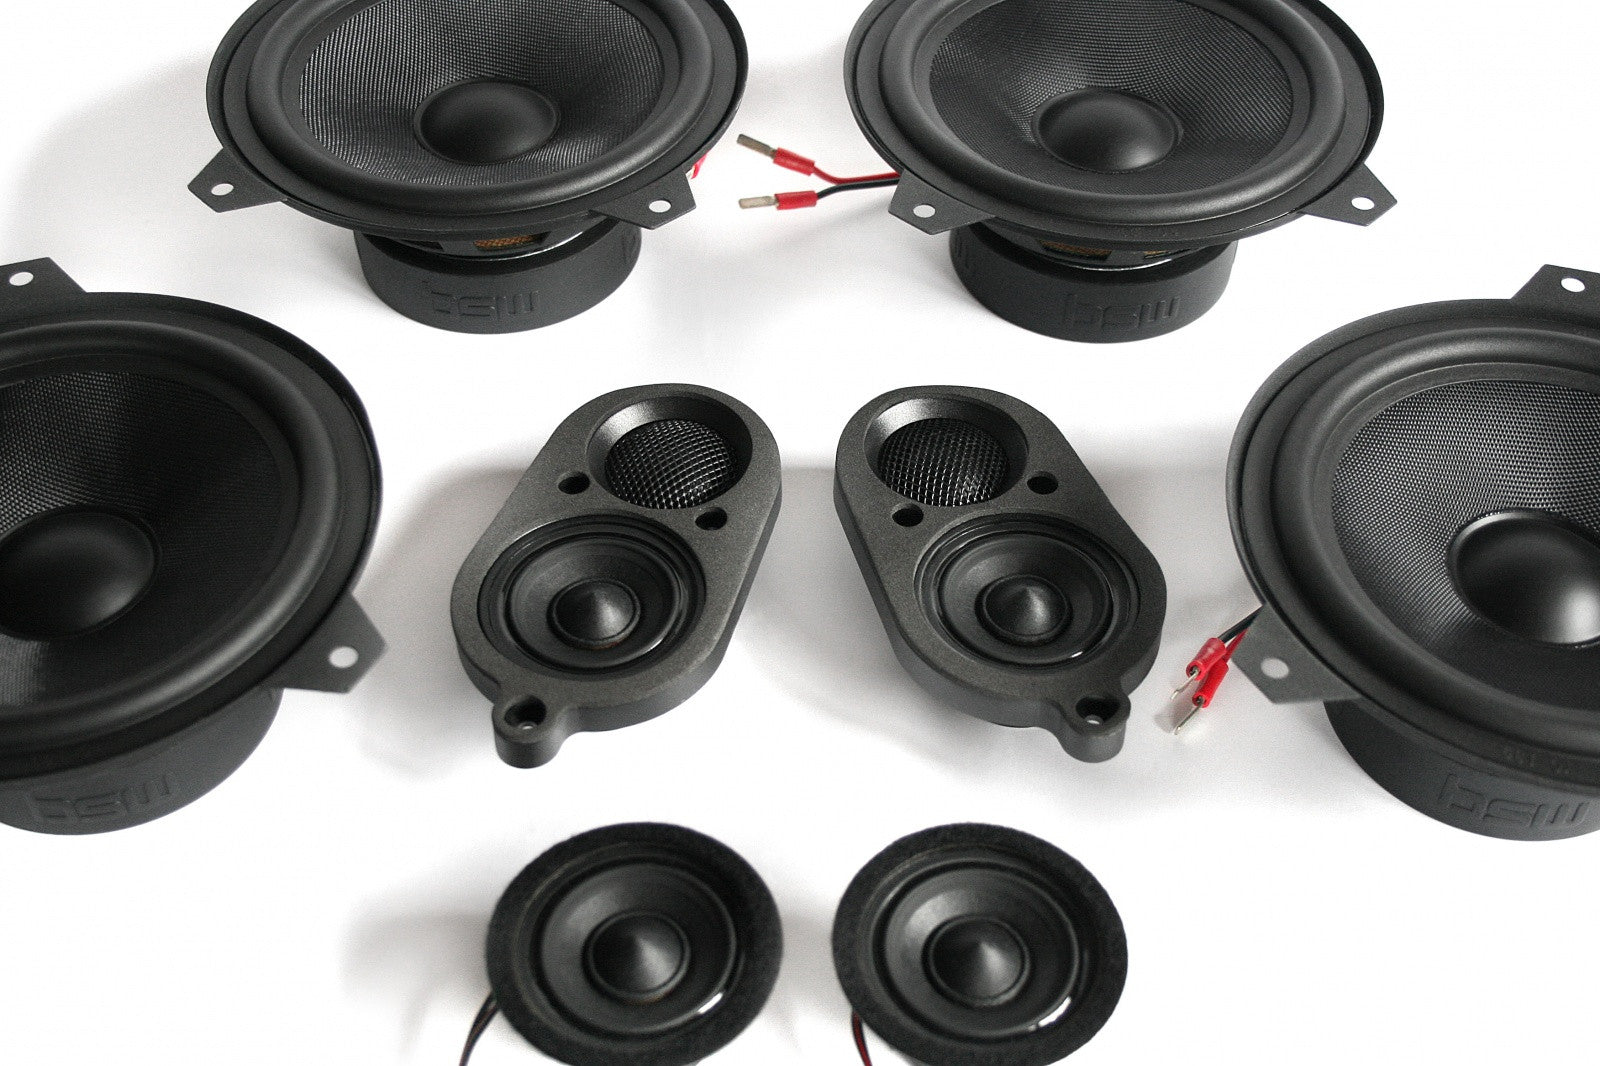 Bavsound Stage One Speaker Upgrade for E46 Coupe with Harman Kardon